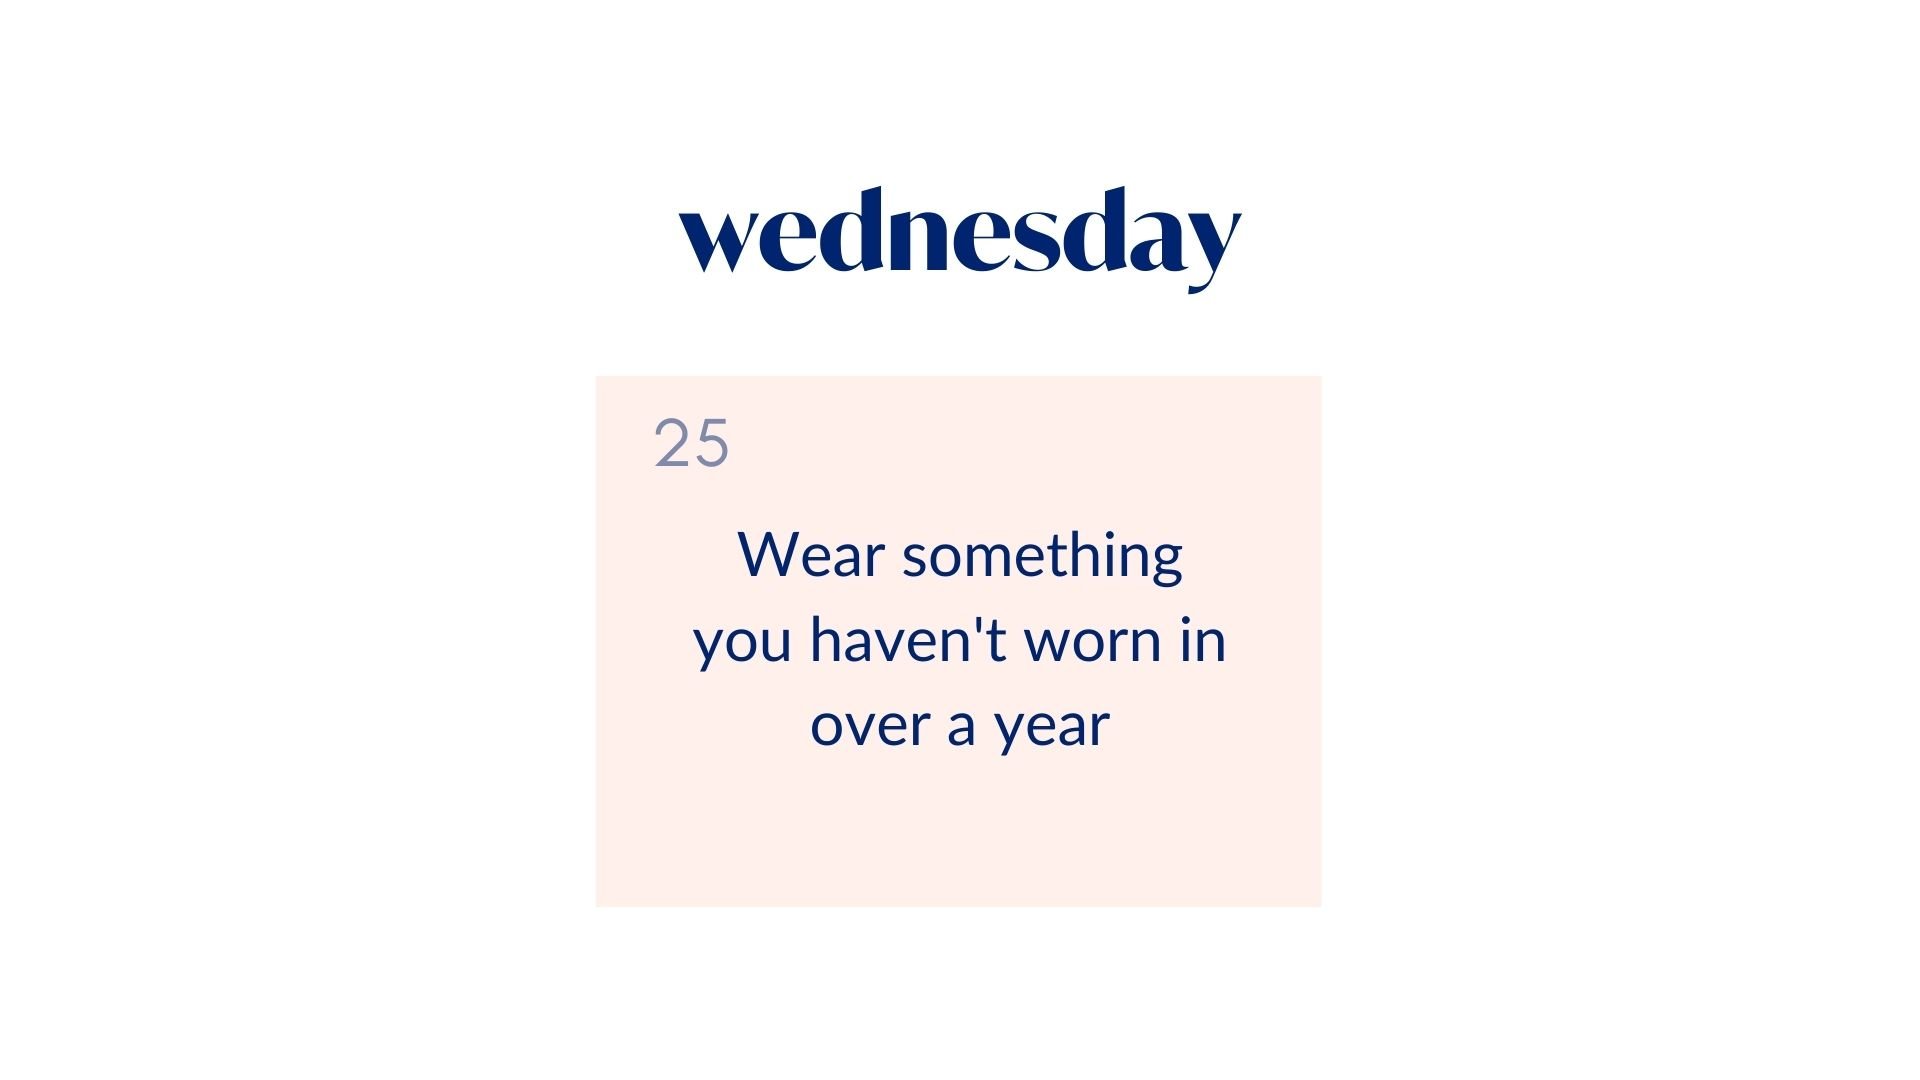 Day 25: Wear something you haven't worn in over a year